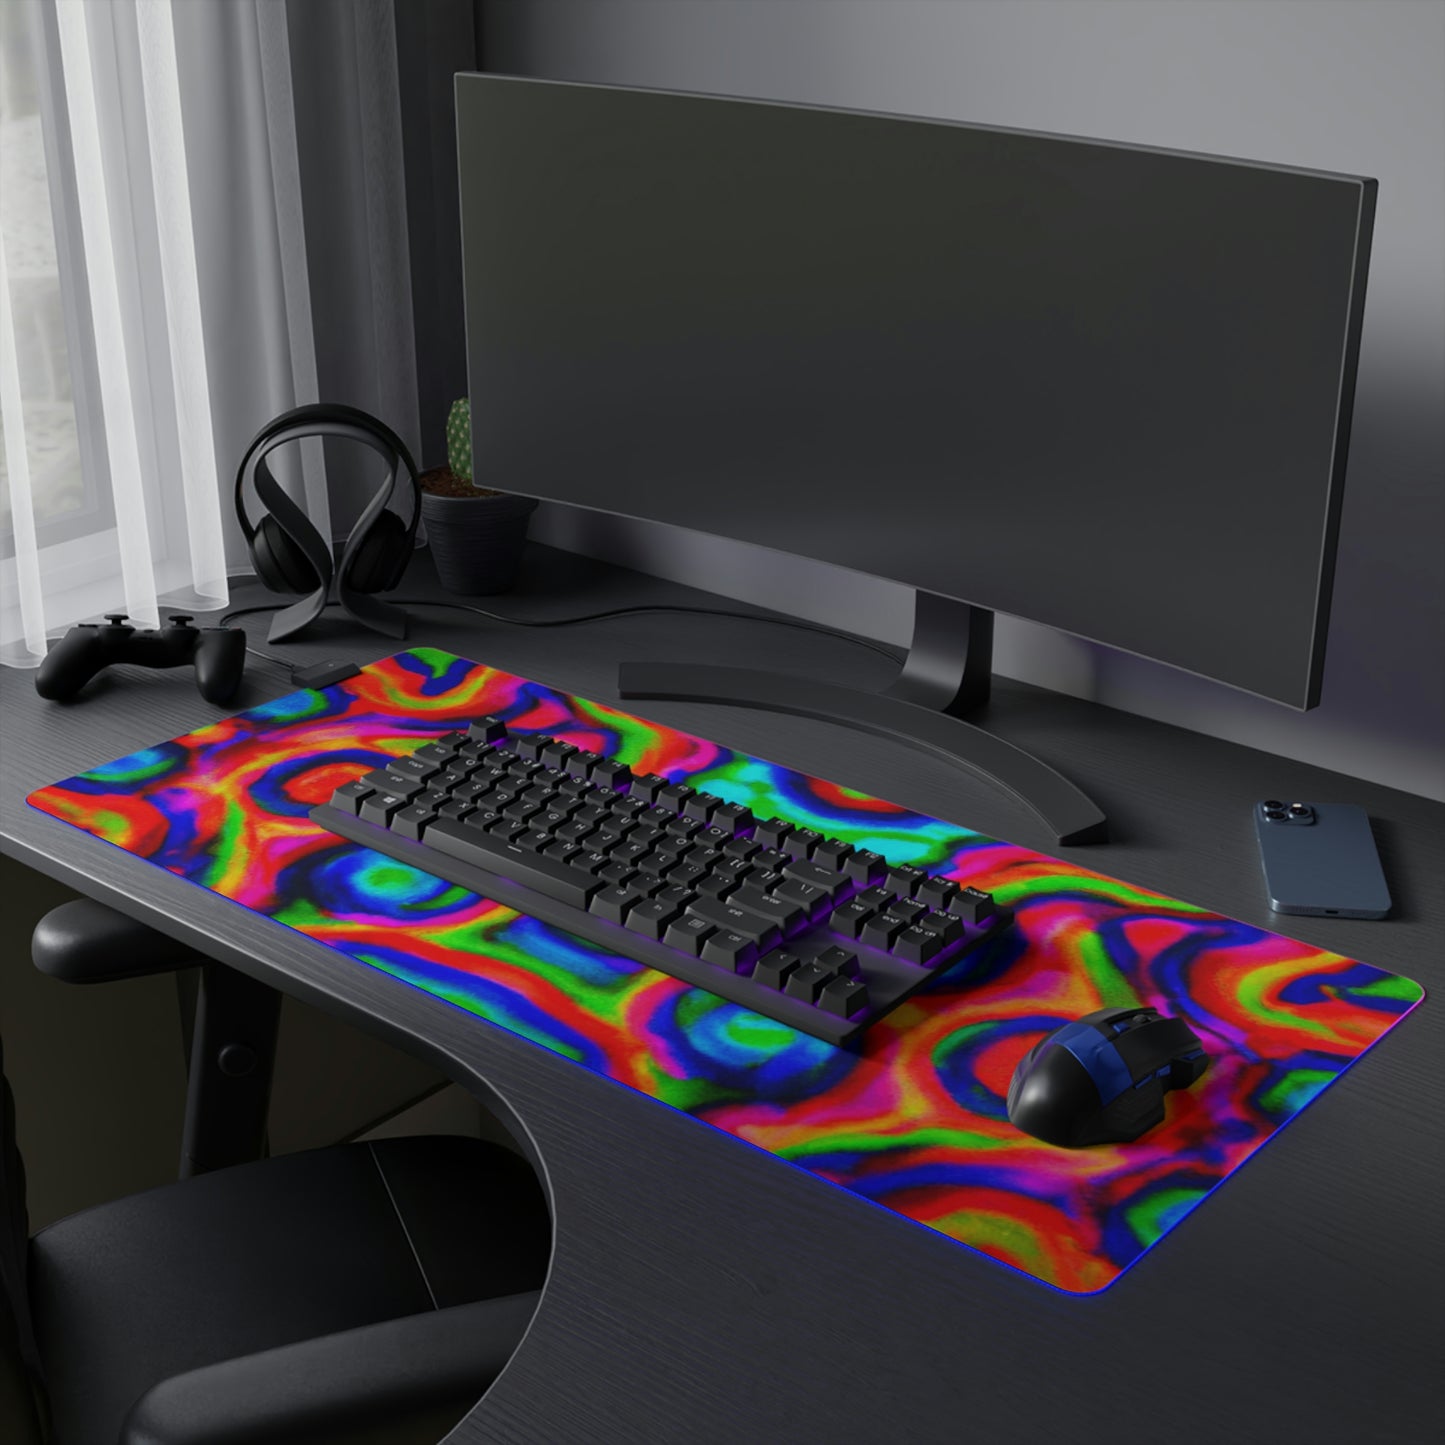 Fritz Saturn - Psychedelic Trippy LED Light Up Gaming Mouse Pad